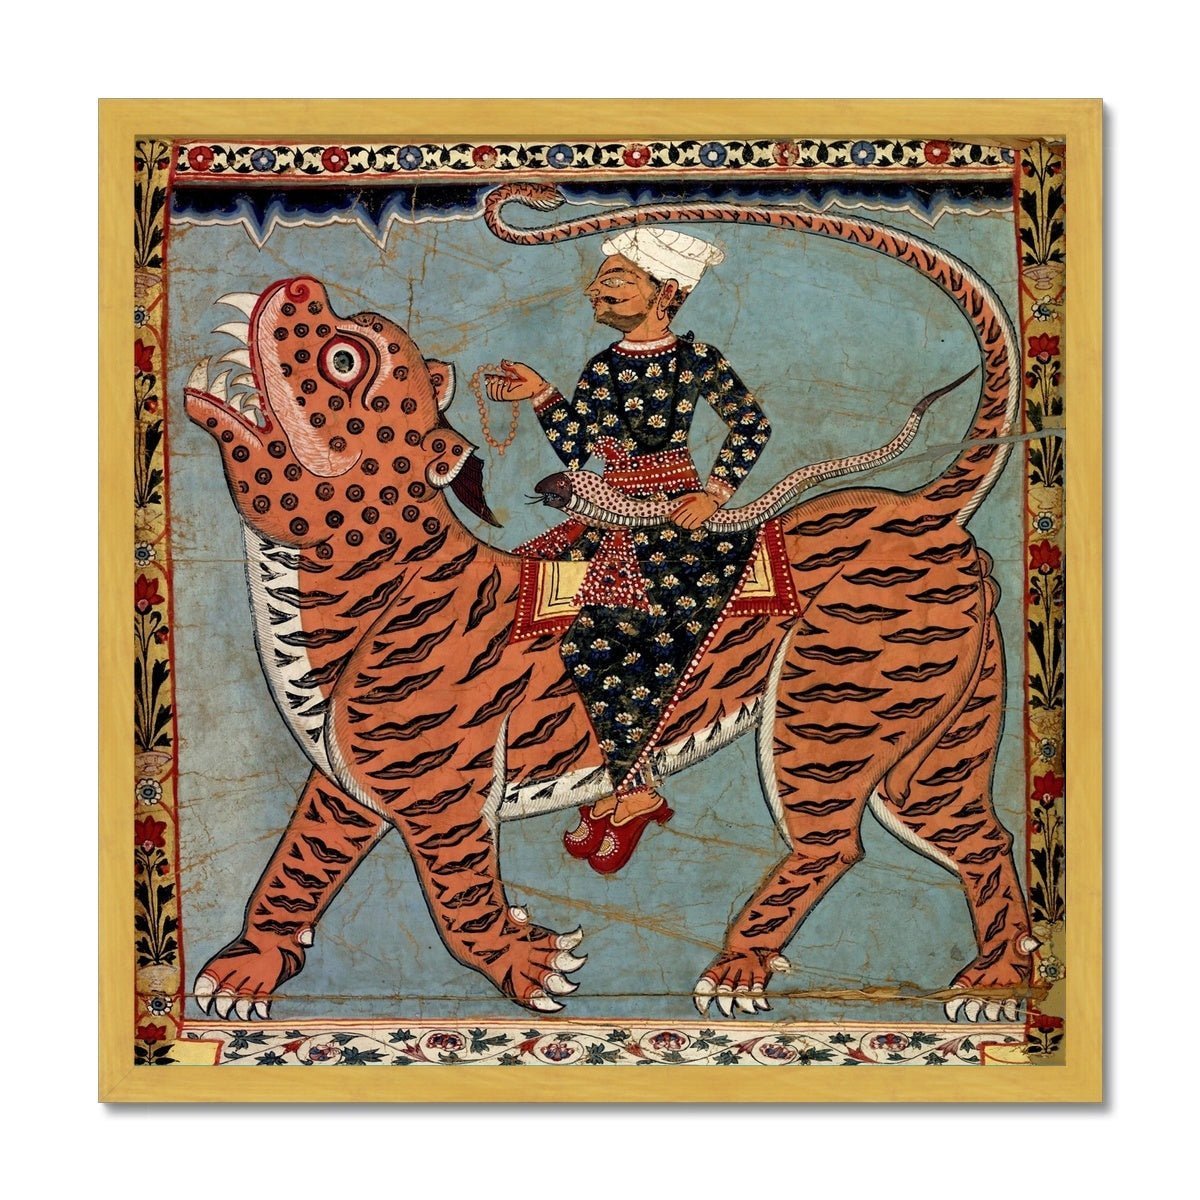 Gold Frame / 12"x12" Pir Gazi and His Tiger Antique Gold and Silver, Indian Art, Islamic Art, Muslim Art, Sufi Rumi Mystic Cat, Antique Gold and Silver Framed